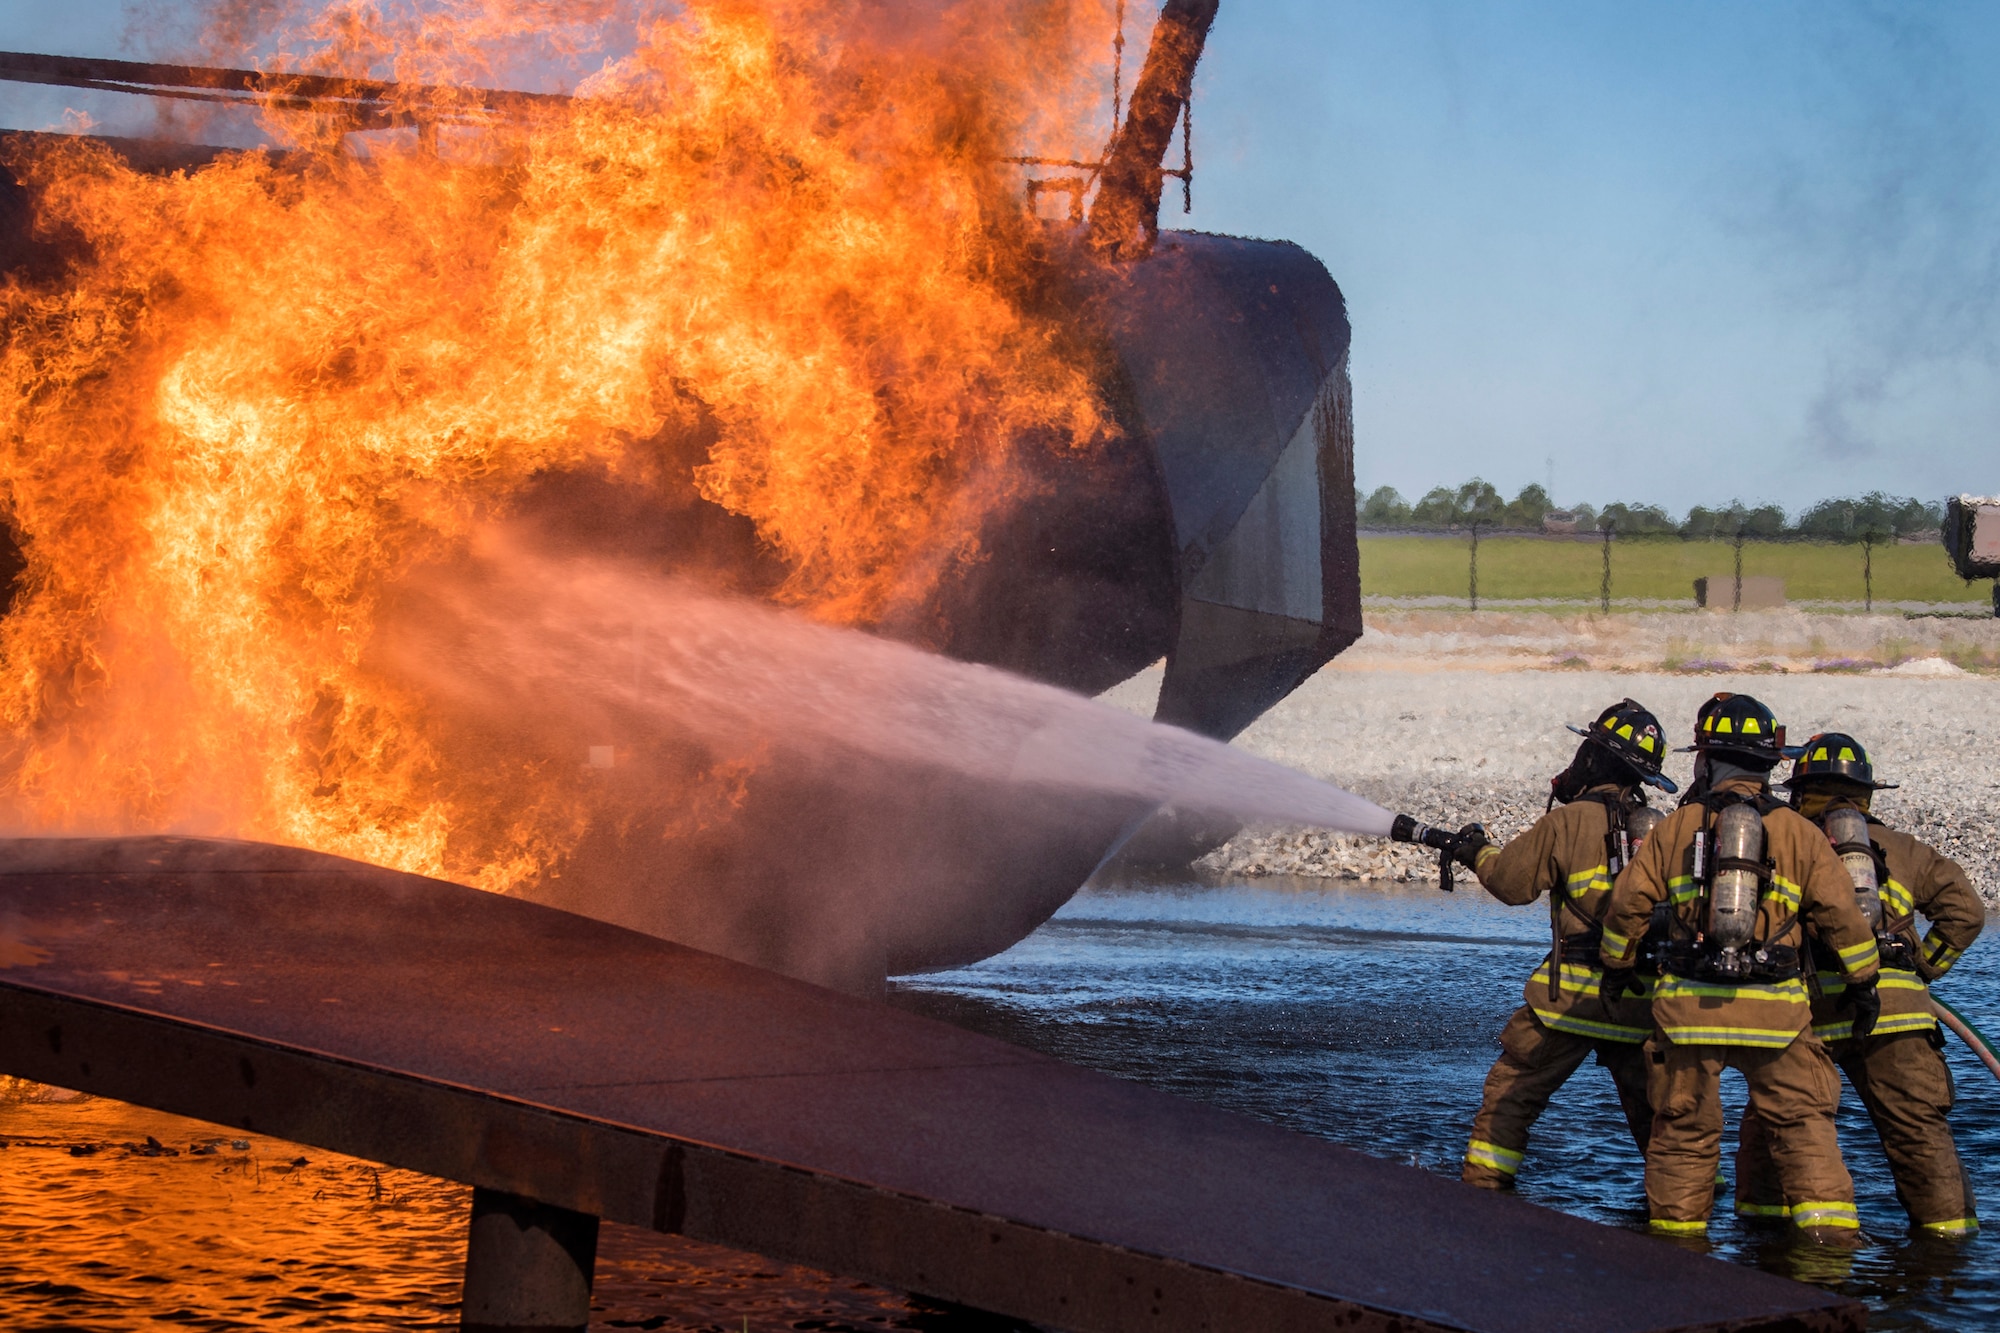 Firefighters combine forces, improve life-saving skills > Air Force > Article Display